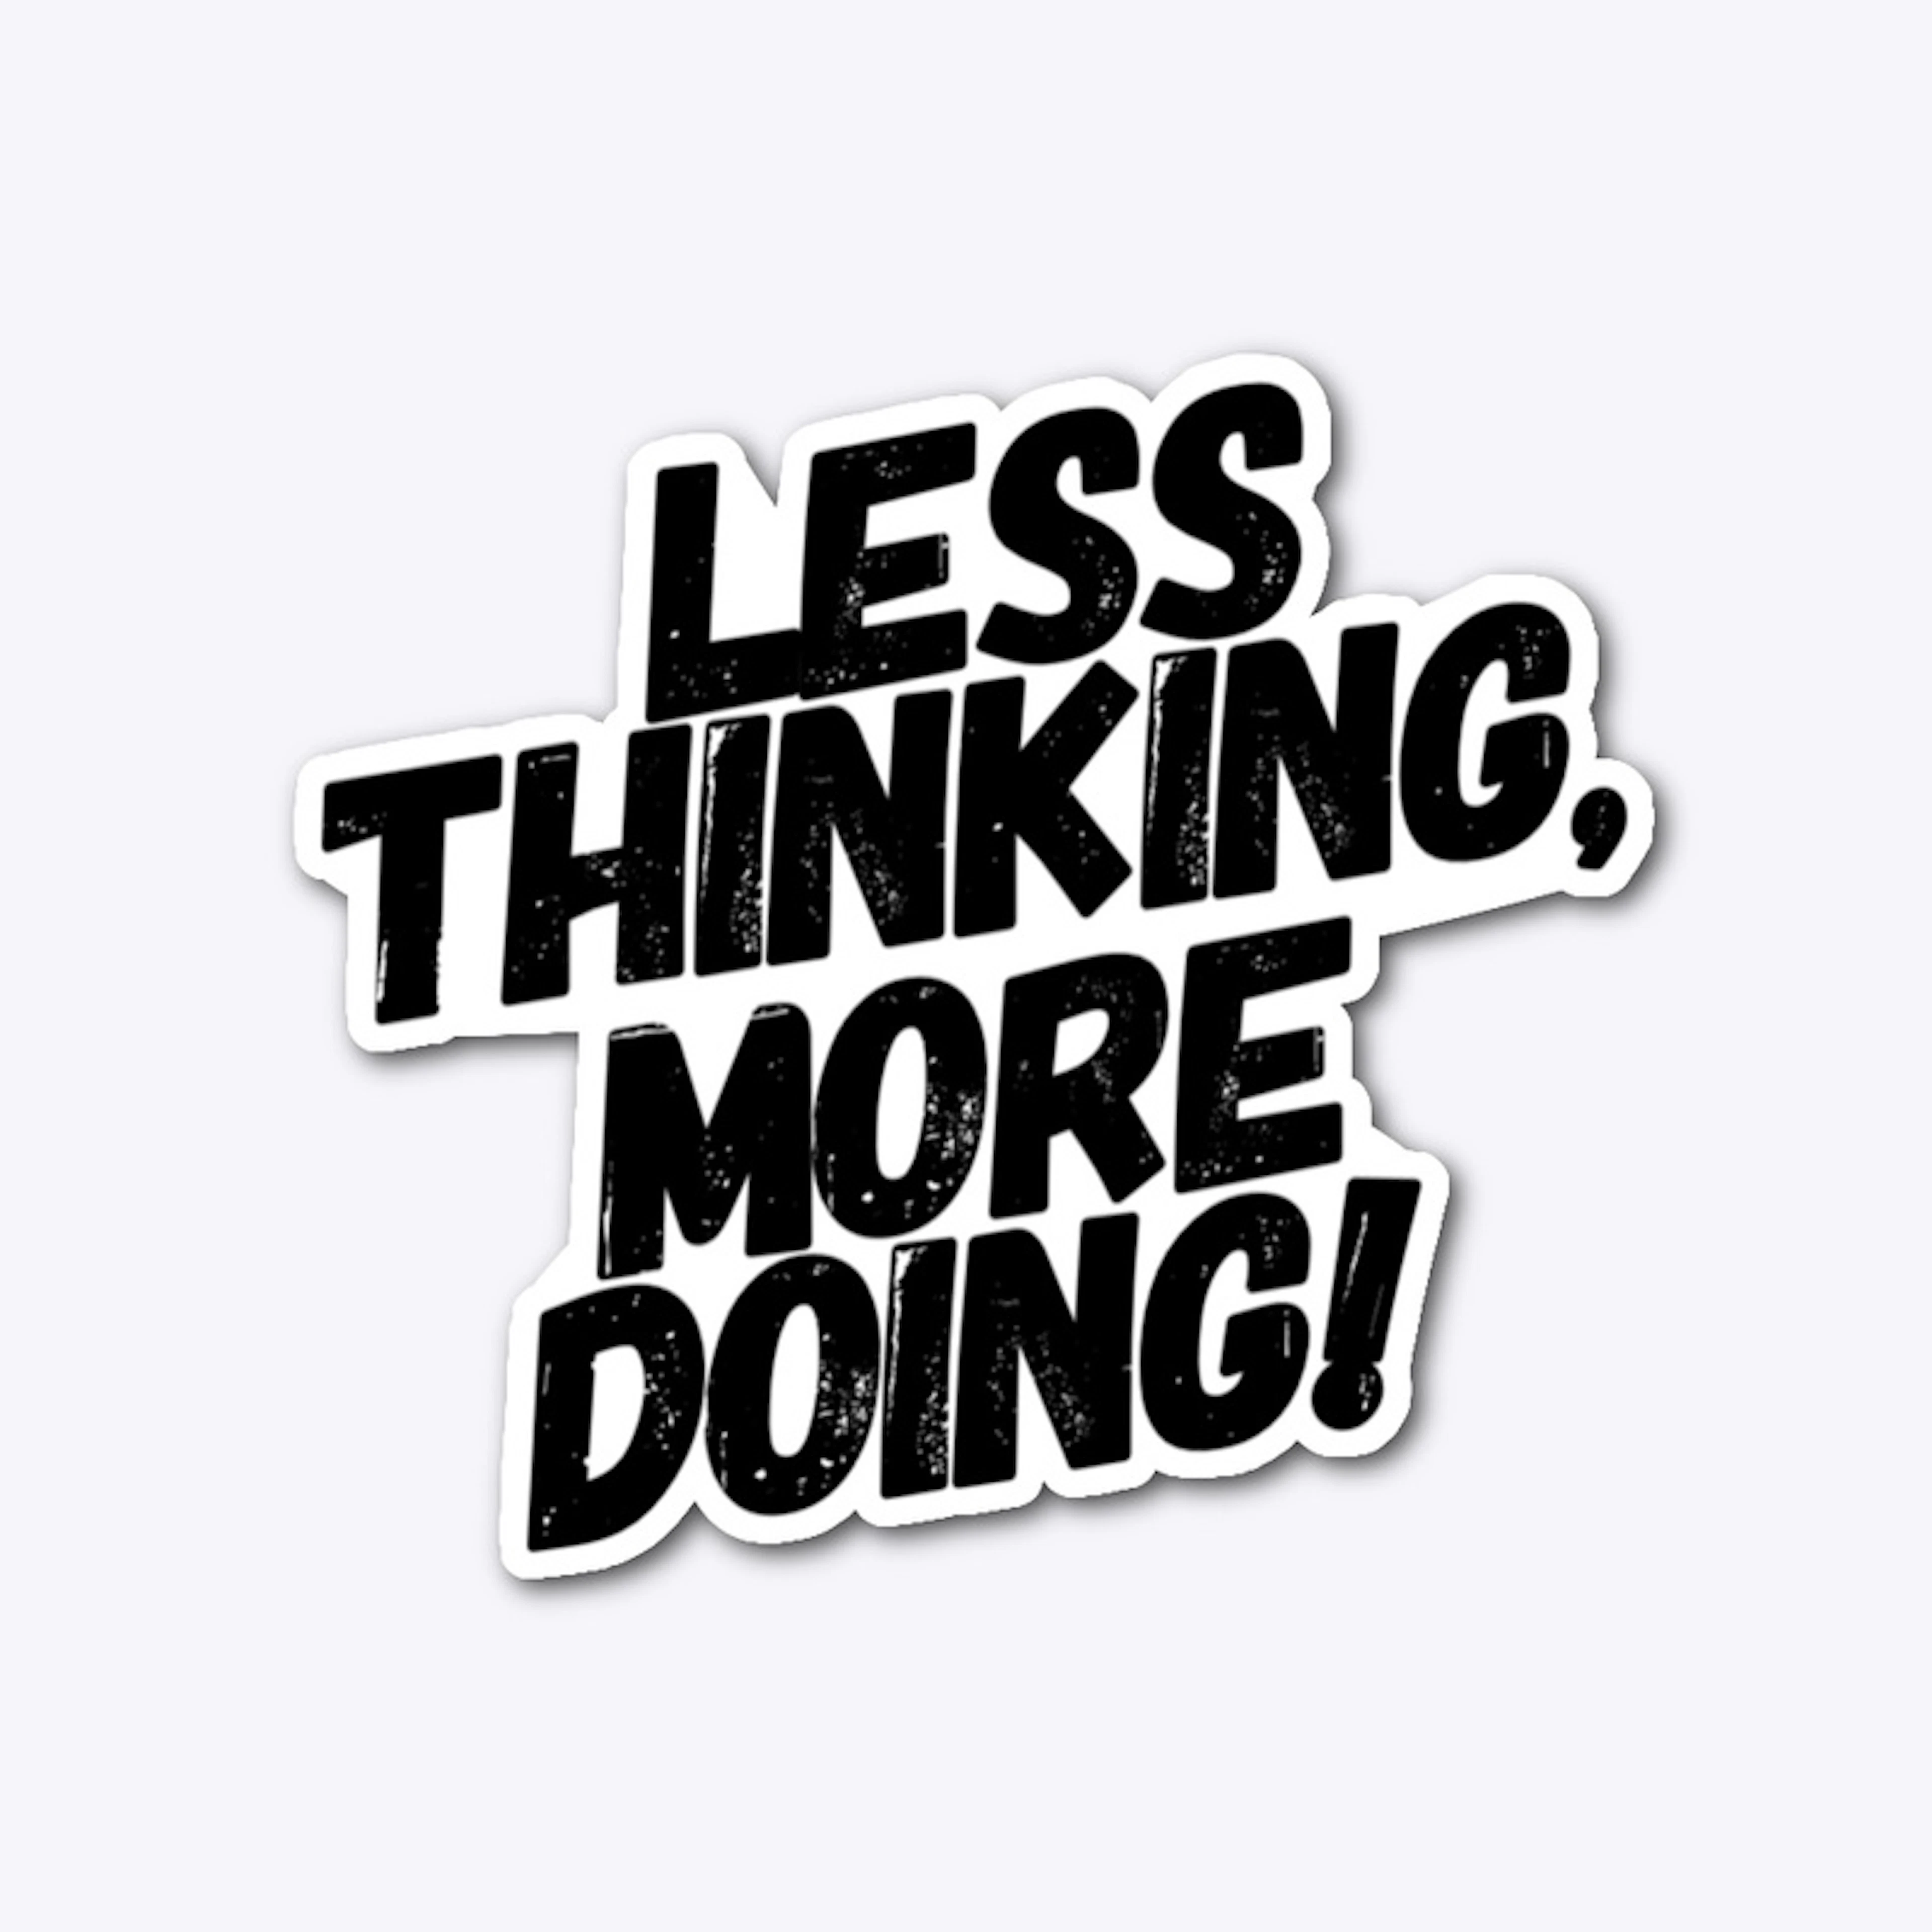 LESS THINKING, MORE DOING